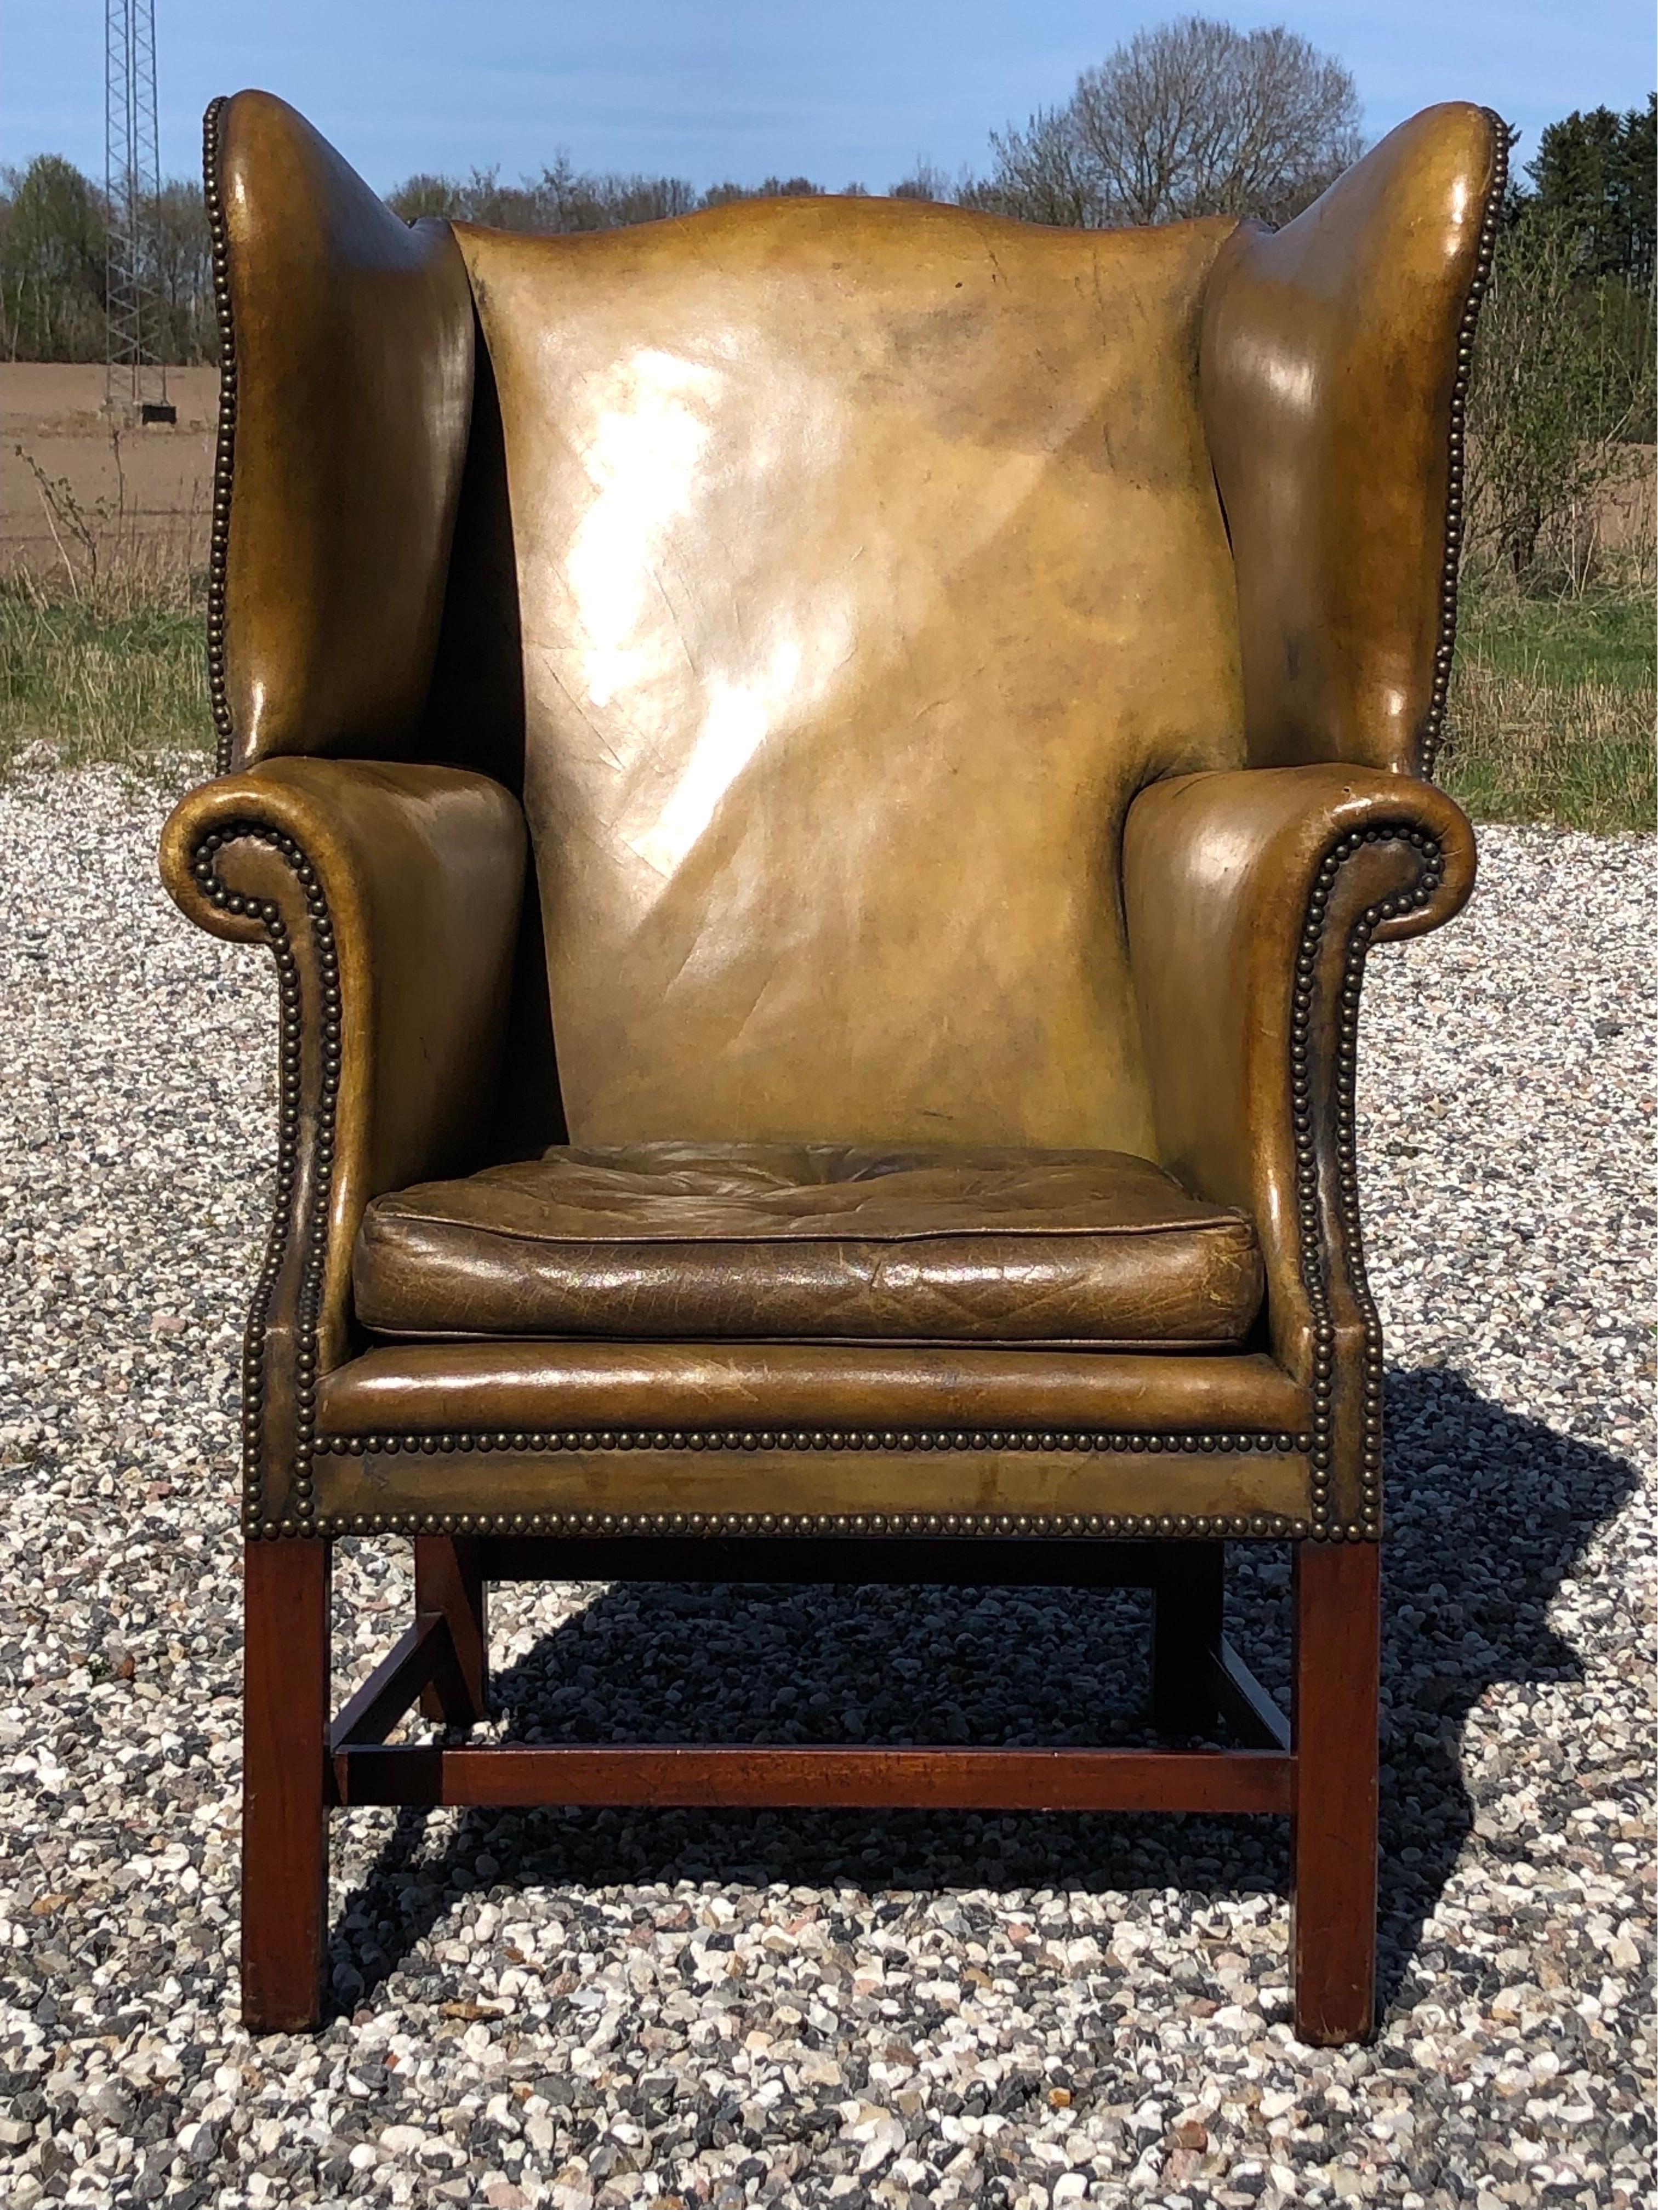 1920ties chair in green leather. Lose pillow filled with horsehair.